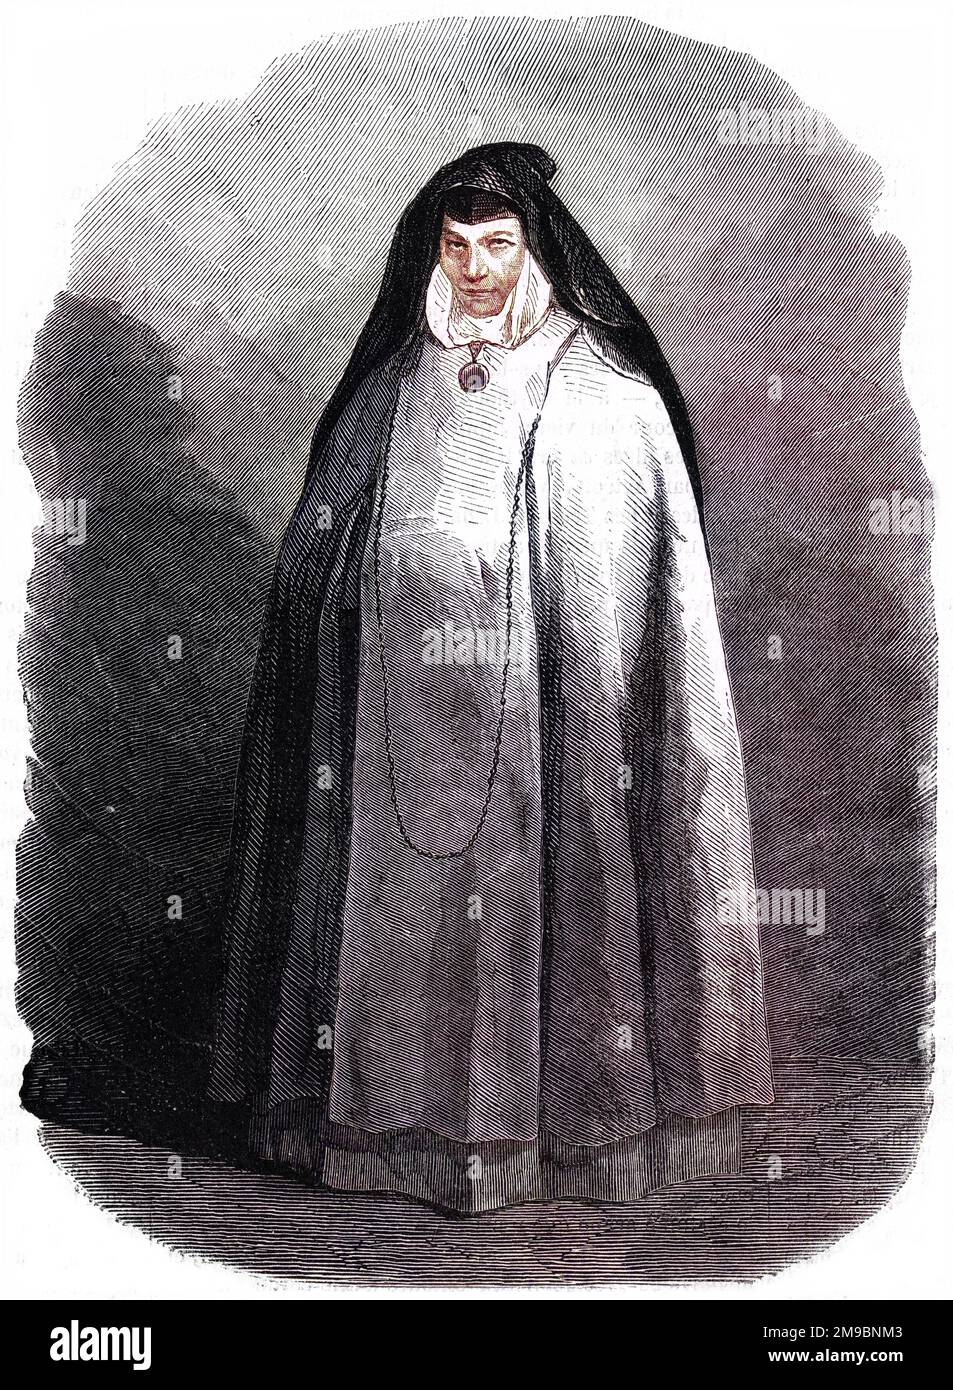 Maria de los Dolores Rafaela Quiroga, known as SOR PATROCINIO, Spanish religious stigmatic and reputed miracle- worker who played influential part in Spanish politics. Stock Photo